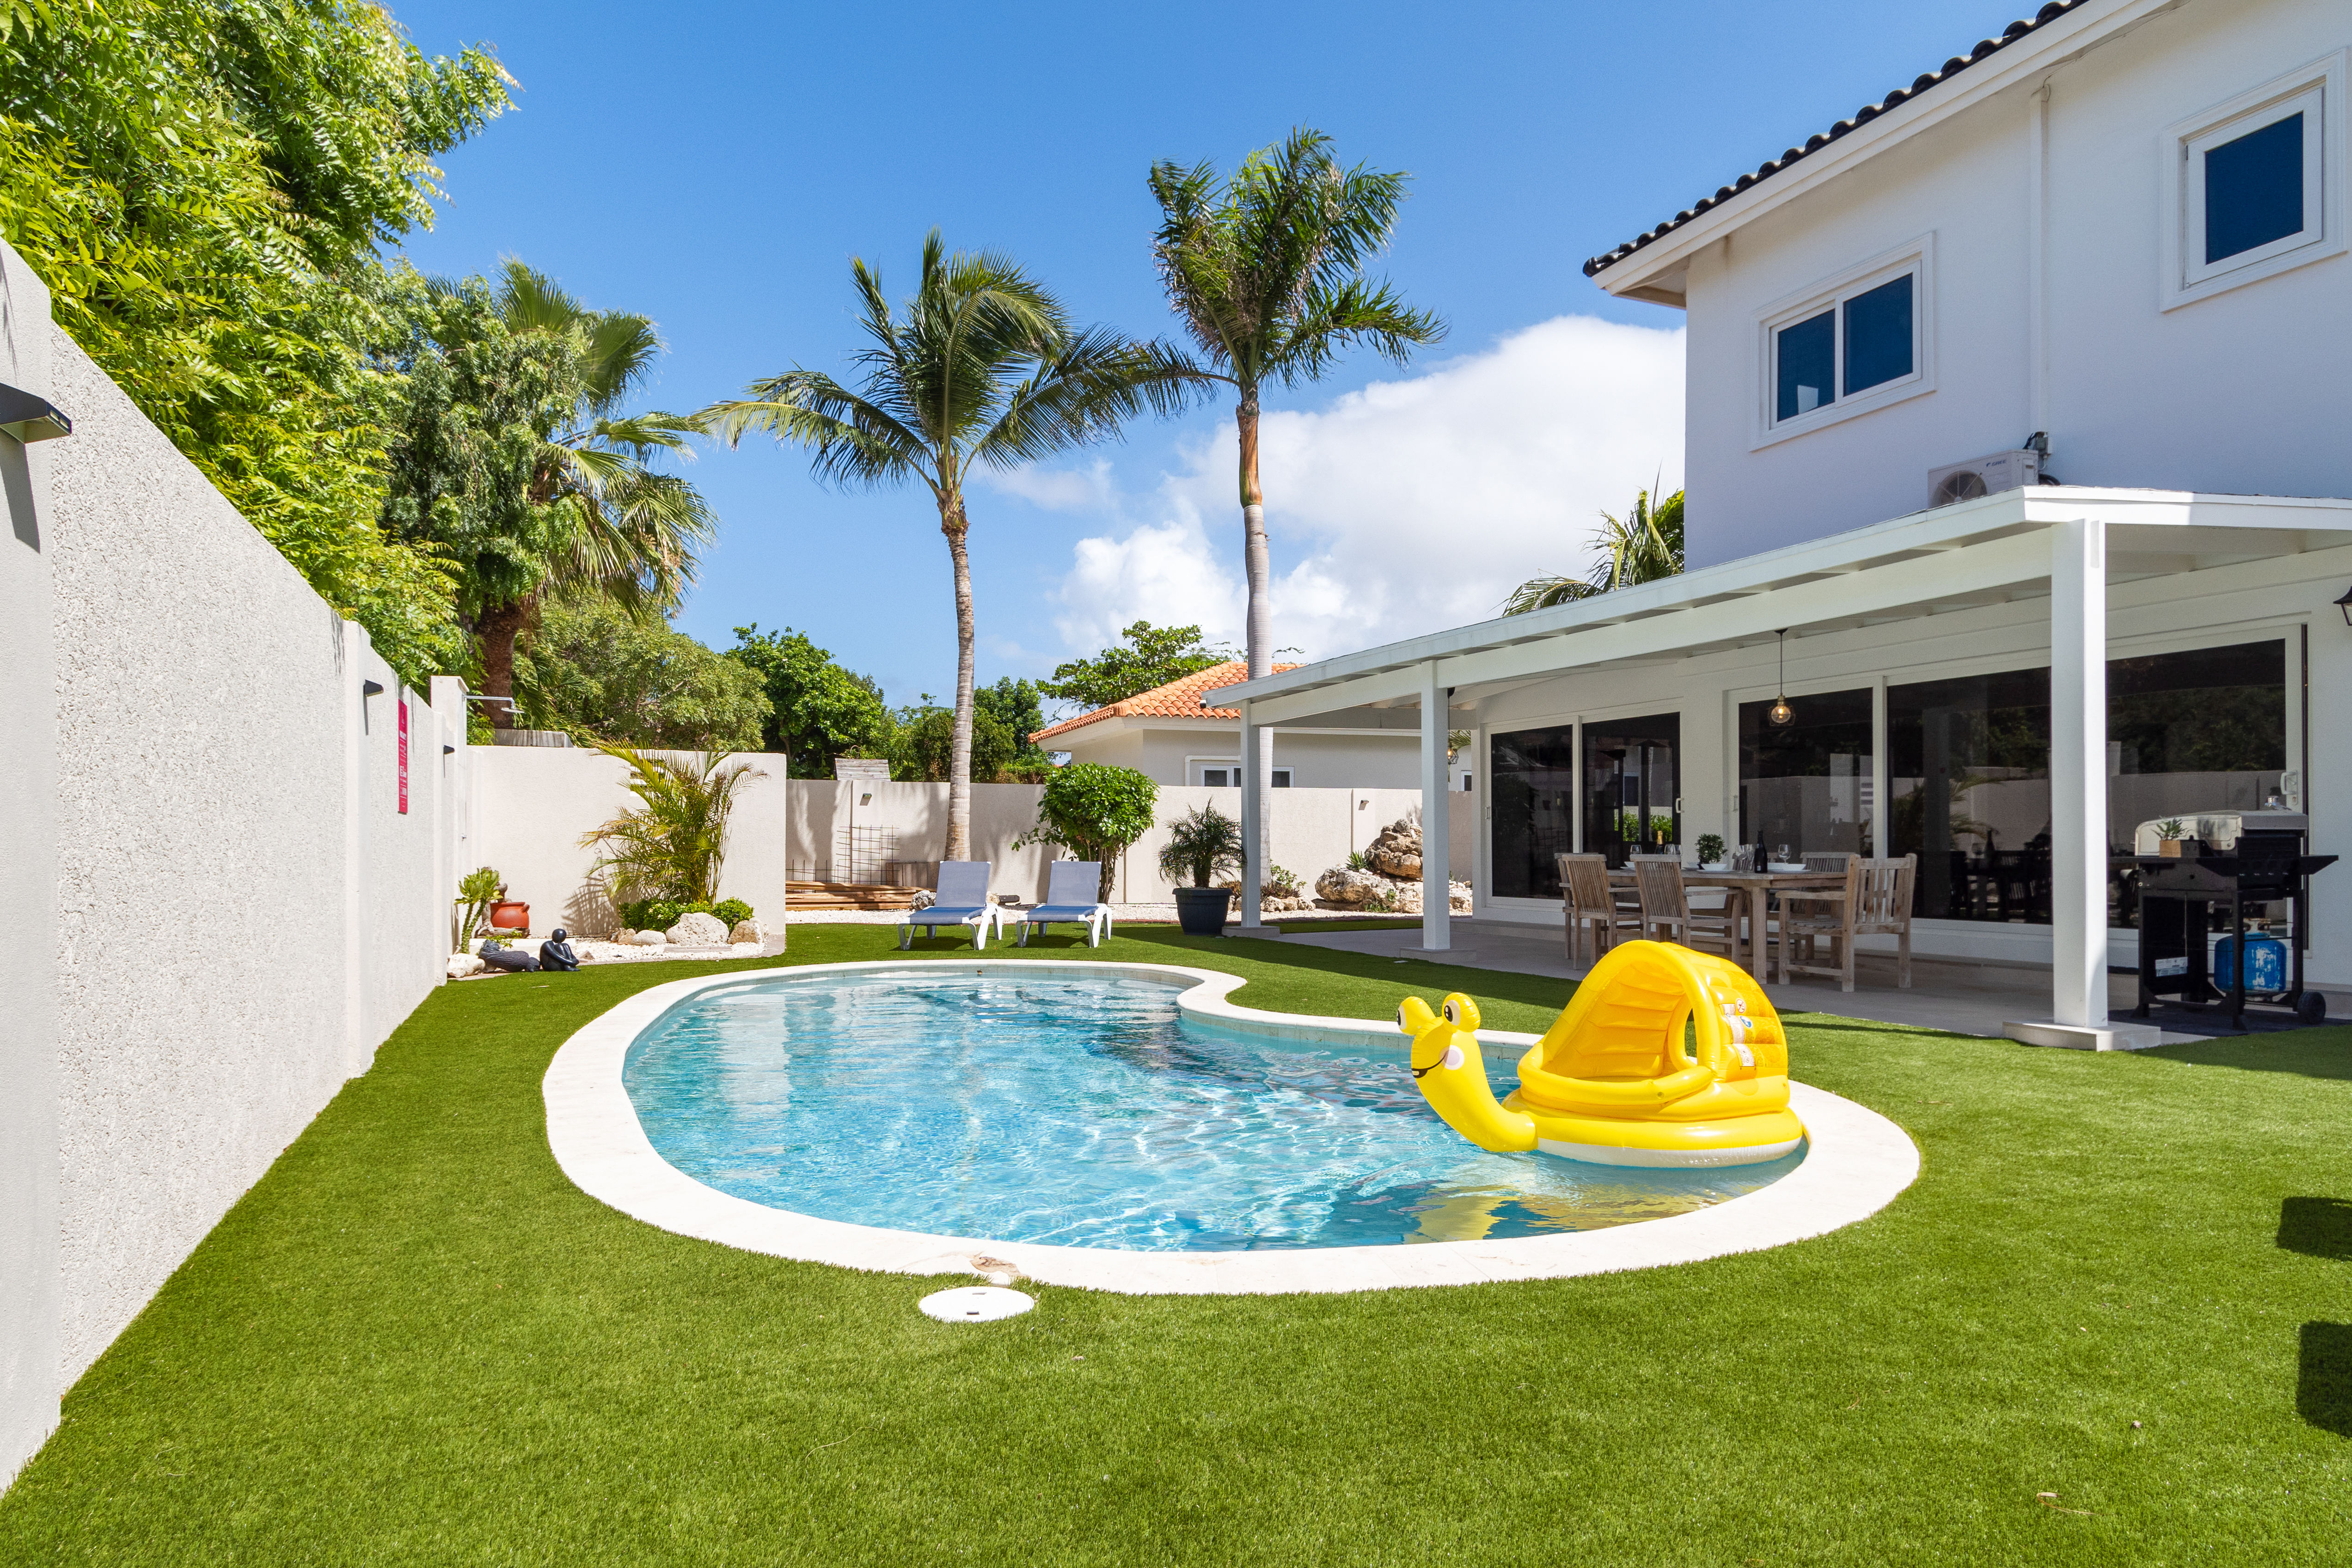 Chic Pool of the 5BR house in Noord Aruba - Some areas offer easy access to grills - Palm trees and tropical plants enhance the vacation feel - Maintained with clear guidelines